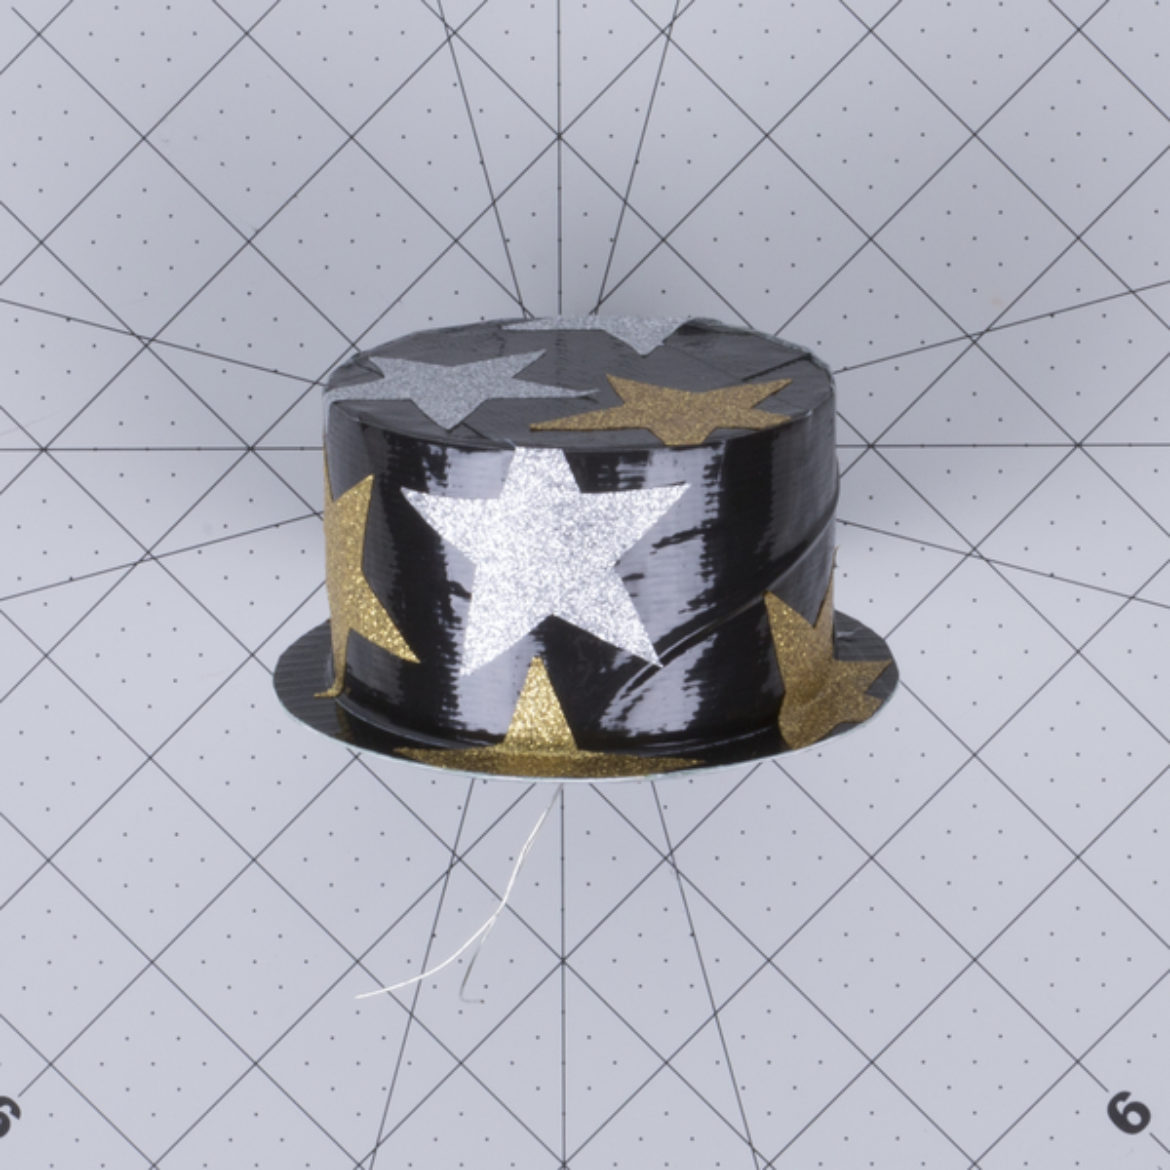 stars from previous step attached to the hat